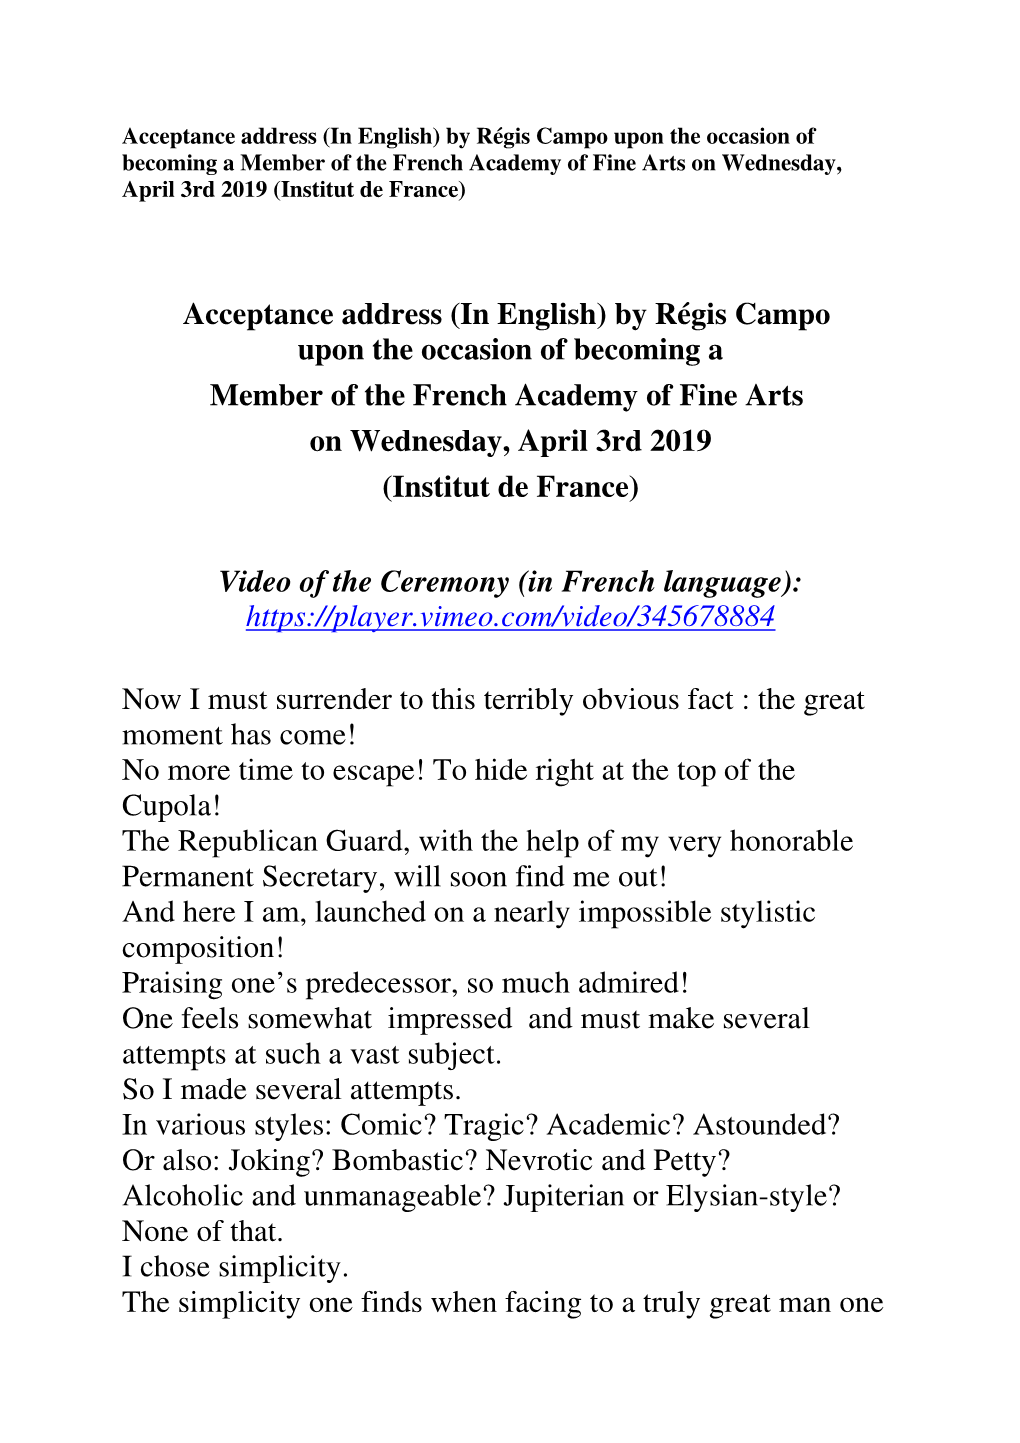 By Régis Campo Upon the Occasion of Becoming a Member of the French Academy of Fine Arts on Wednesday, April 3Rd 2019 (Institut De France)